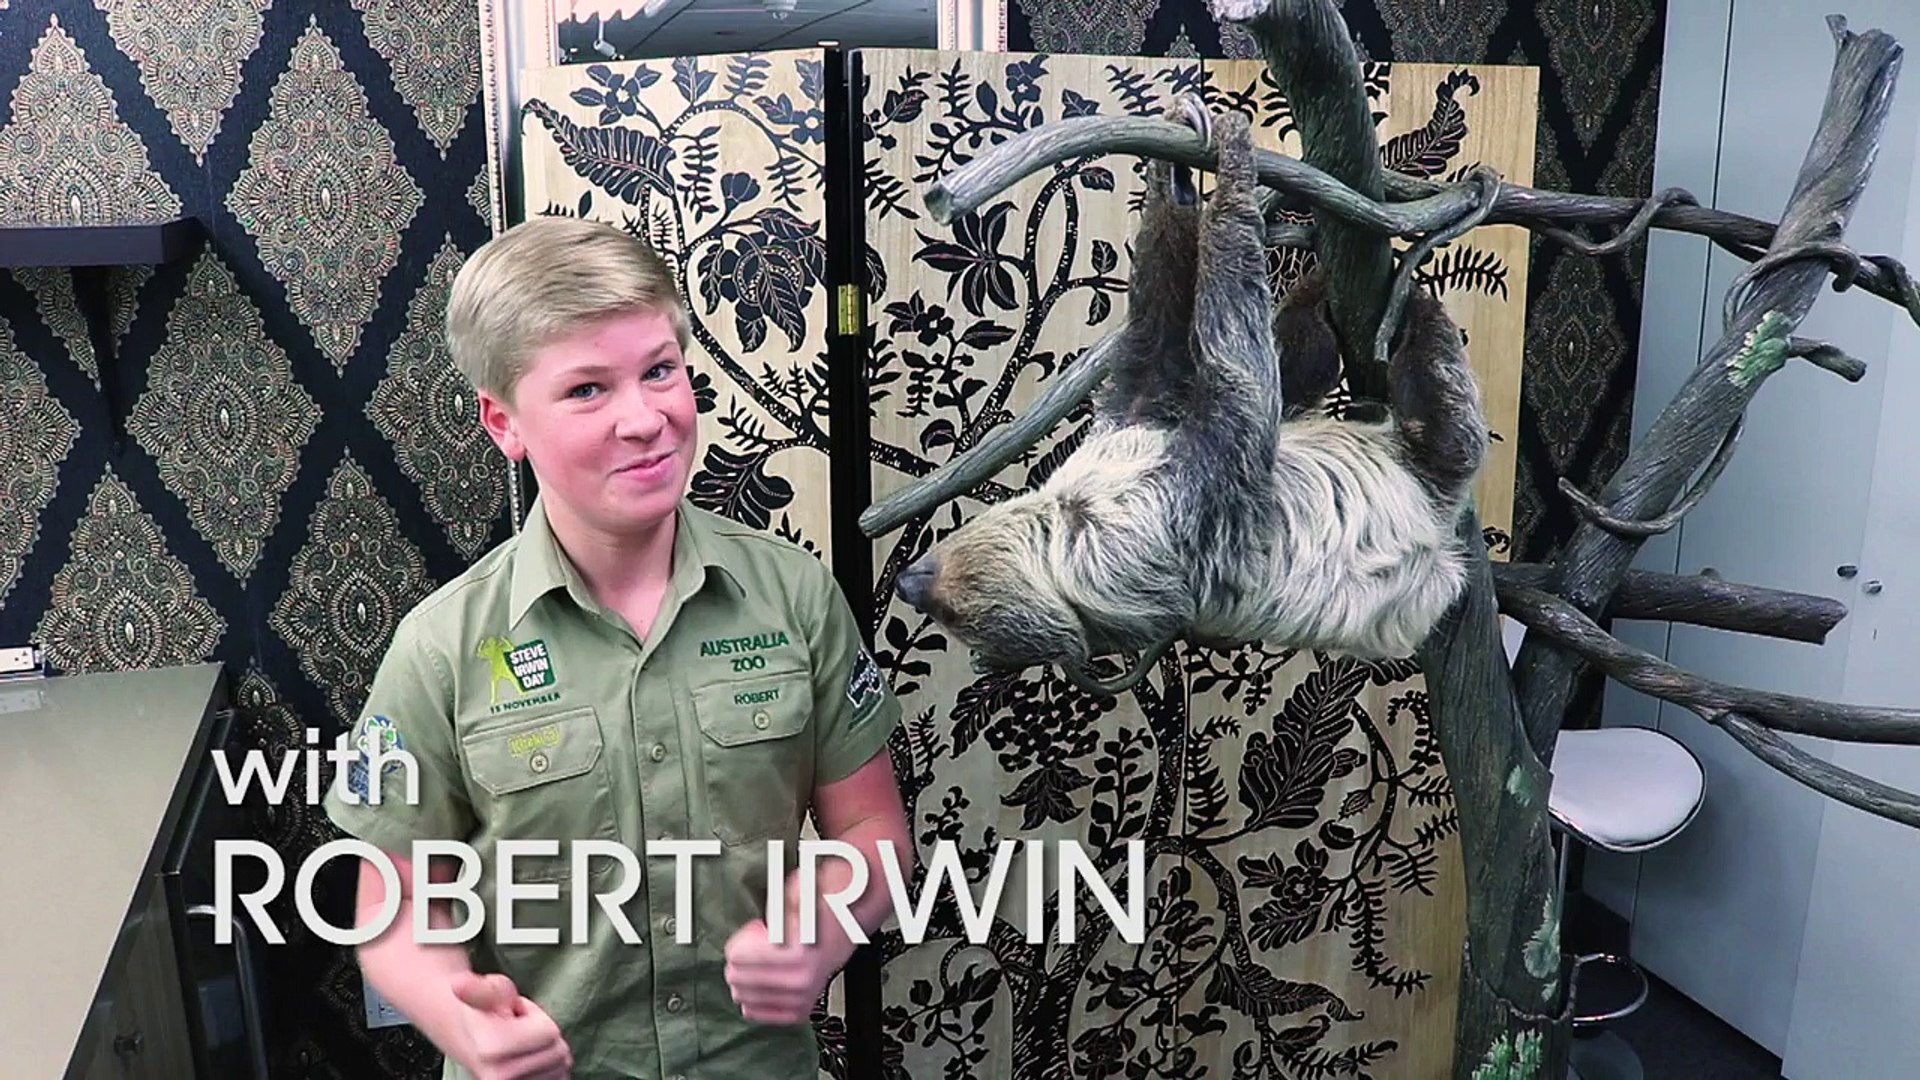 Animal Facts with Robert Irwin - Two-Toed Sloth-U38vprRMyWs